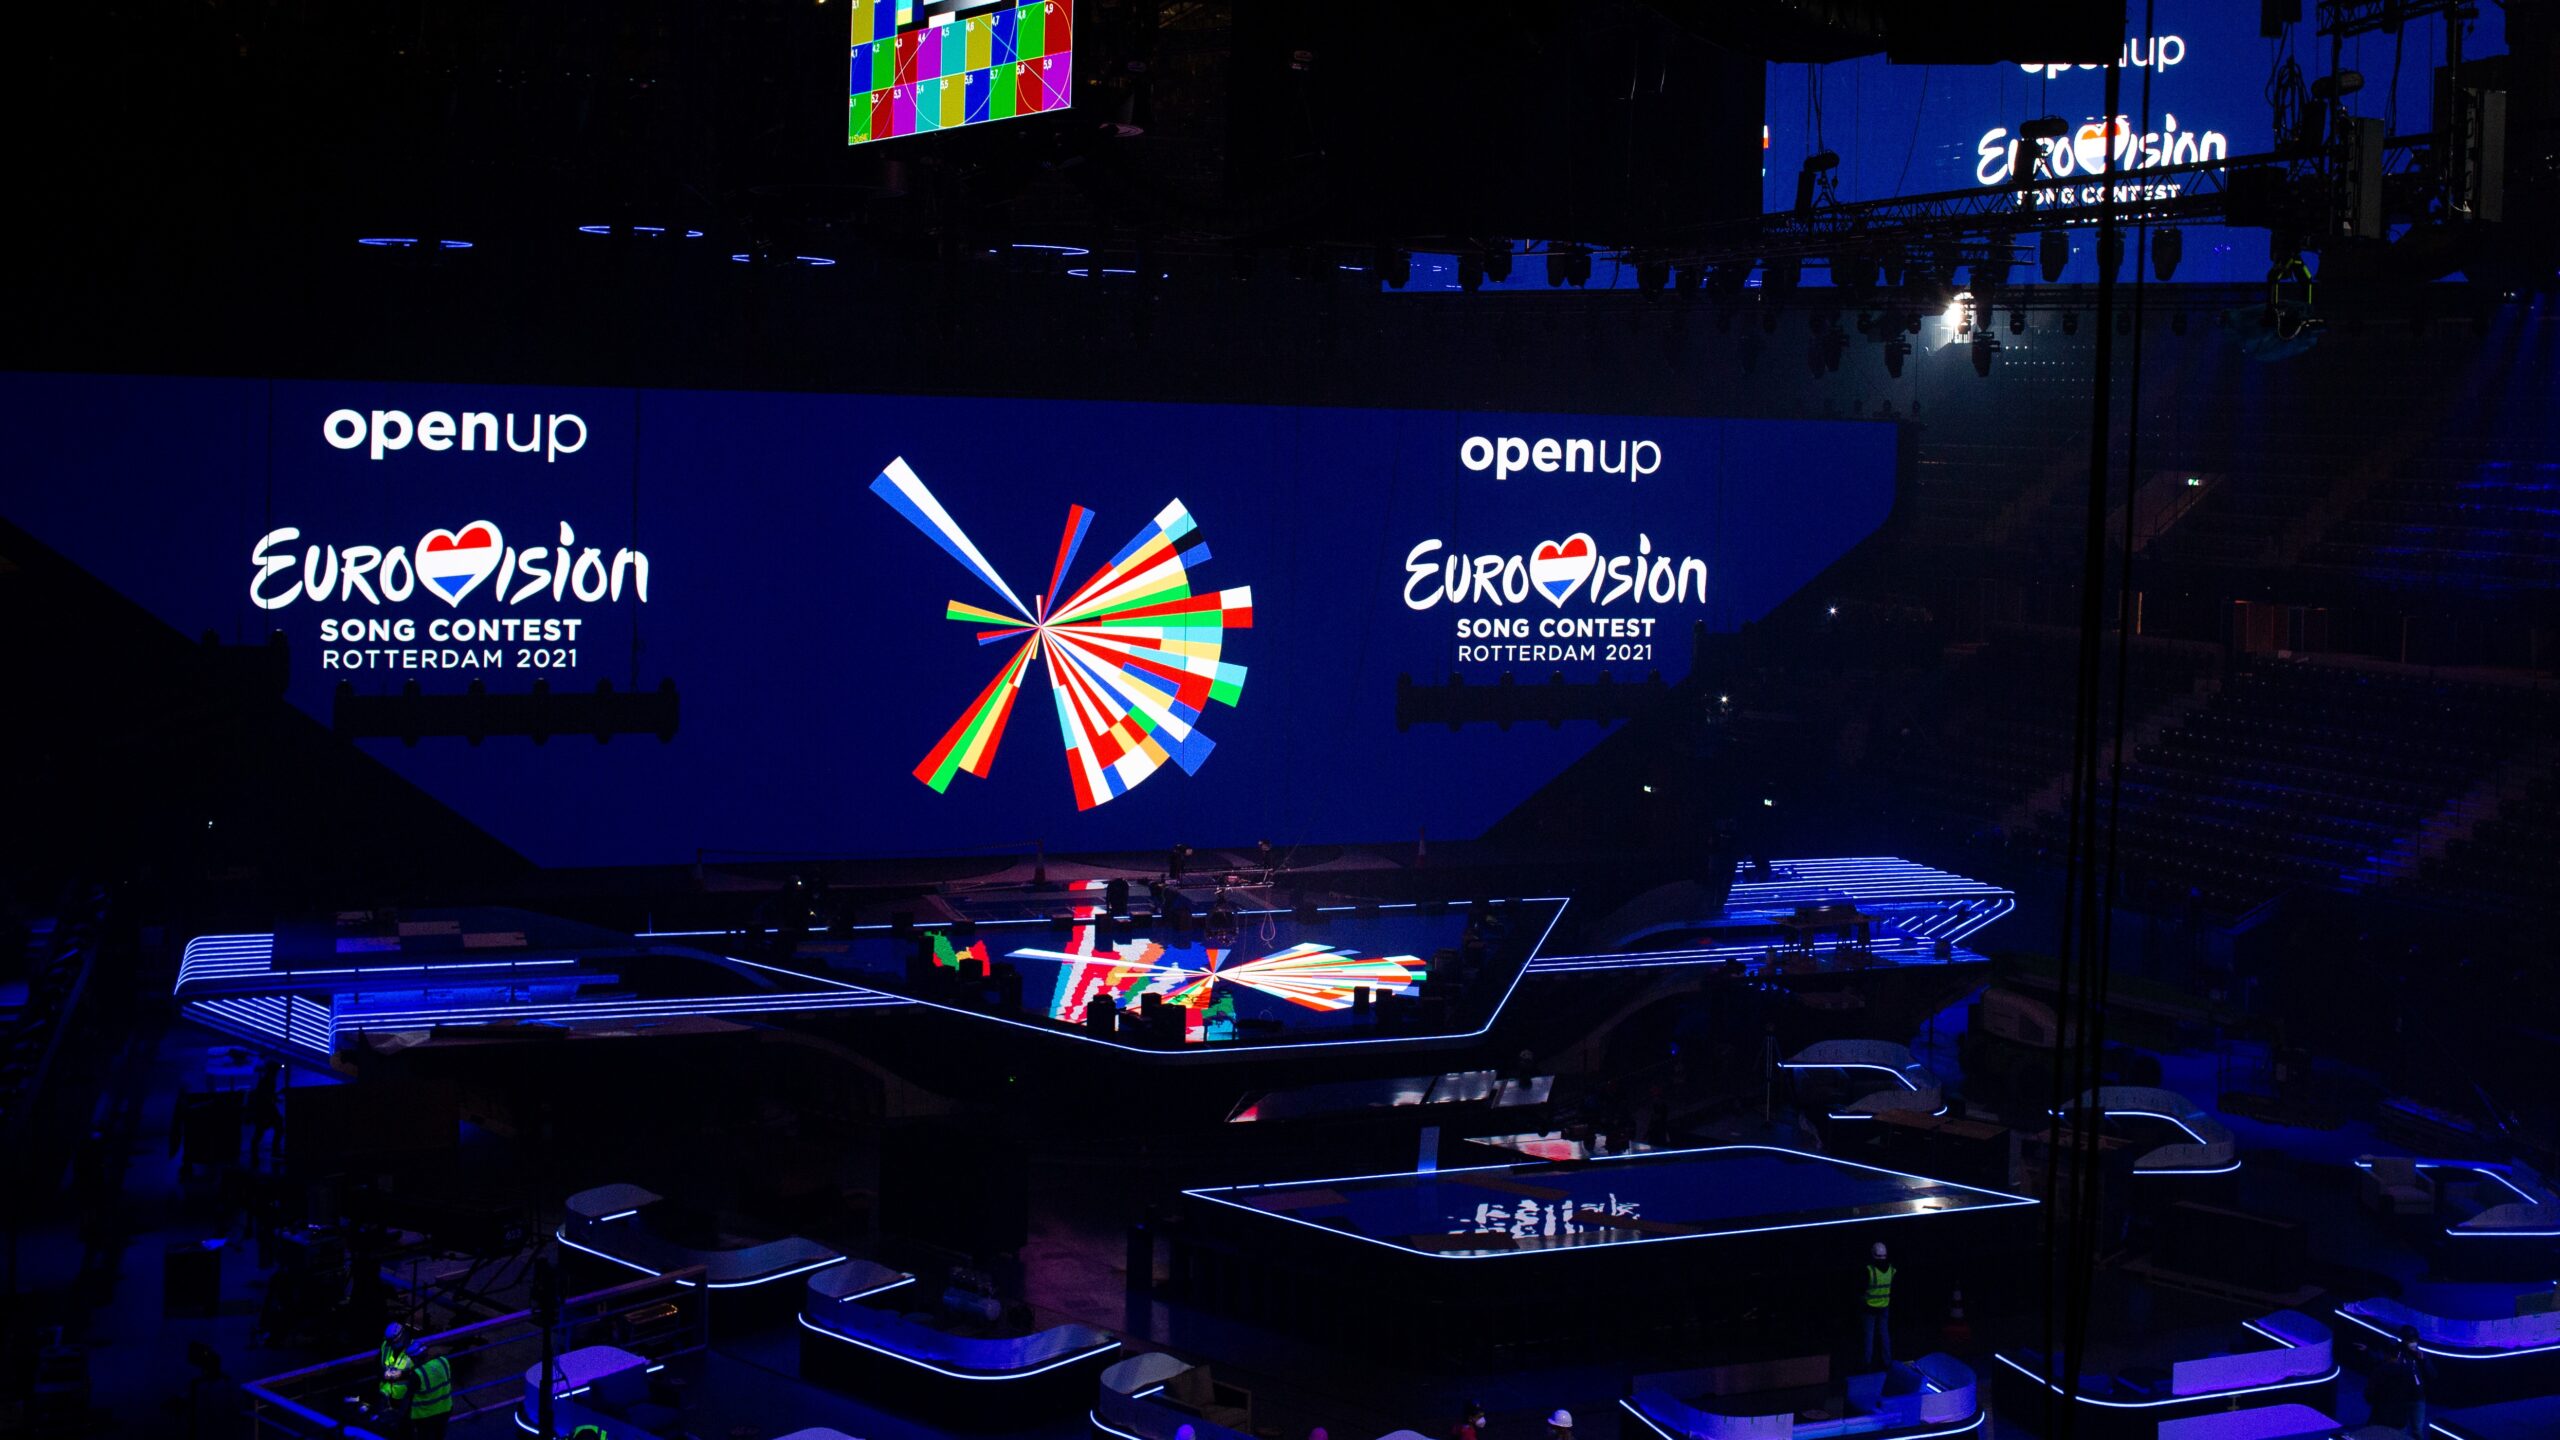 Eurovision 2021: Live audience welcome during Eurovision Song Contest 2021